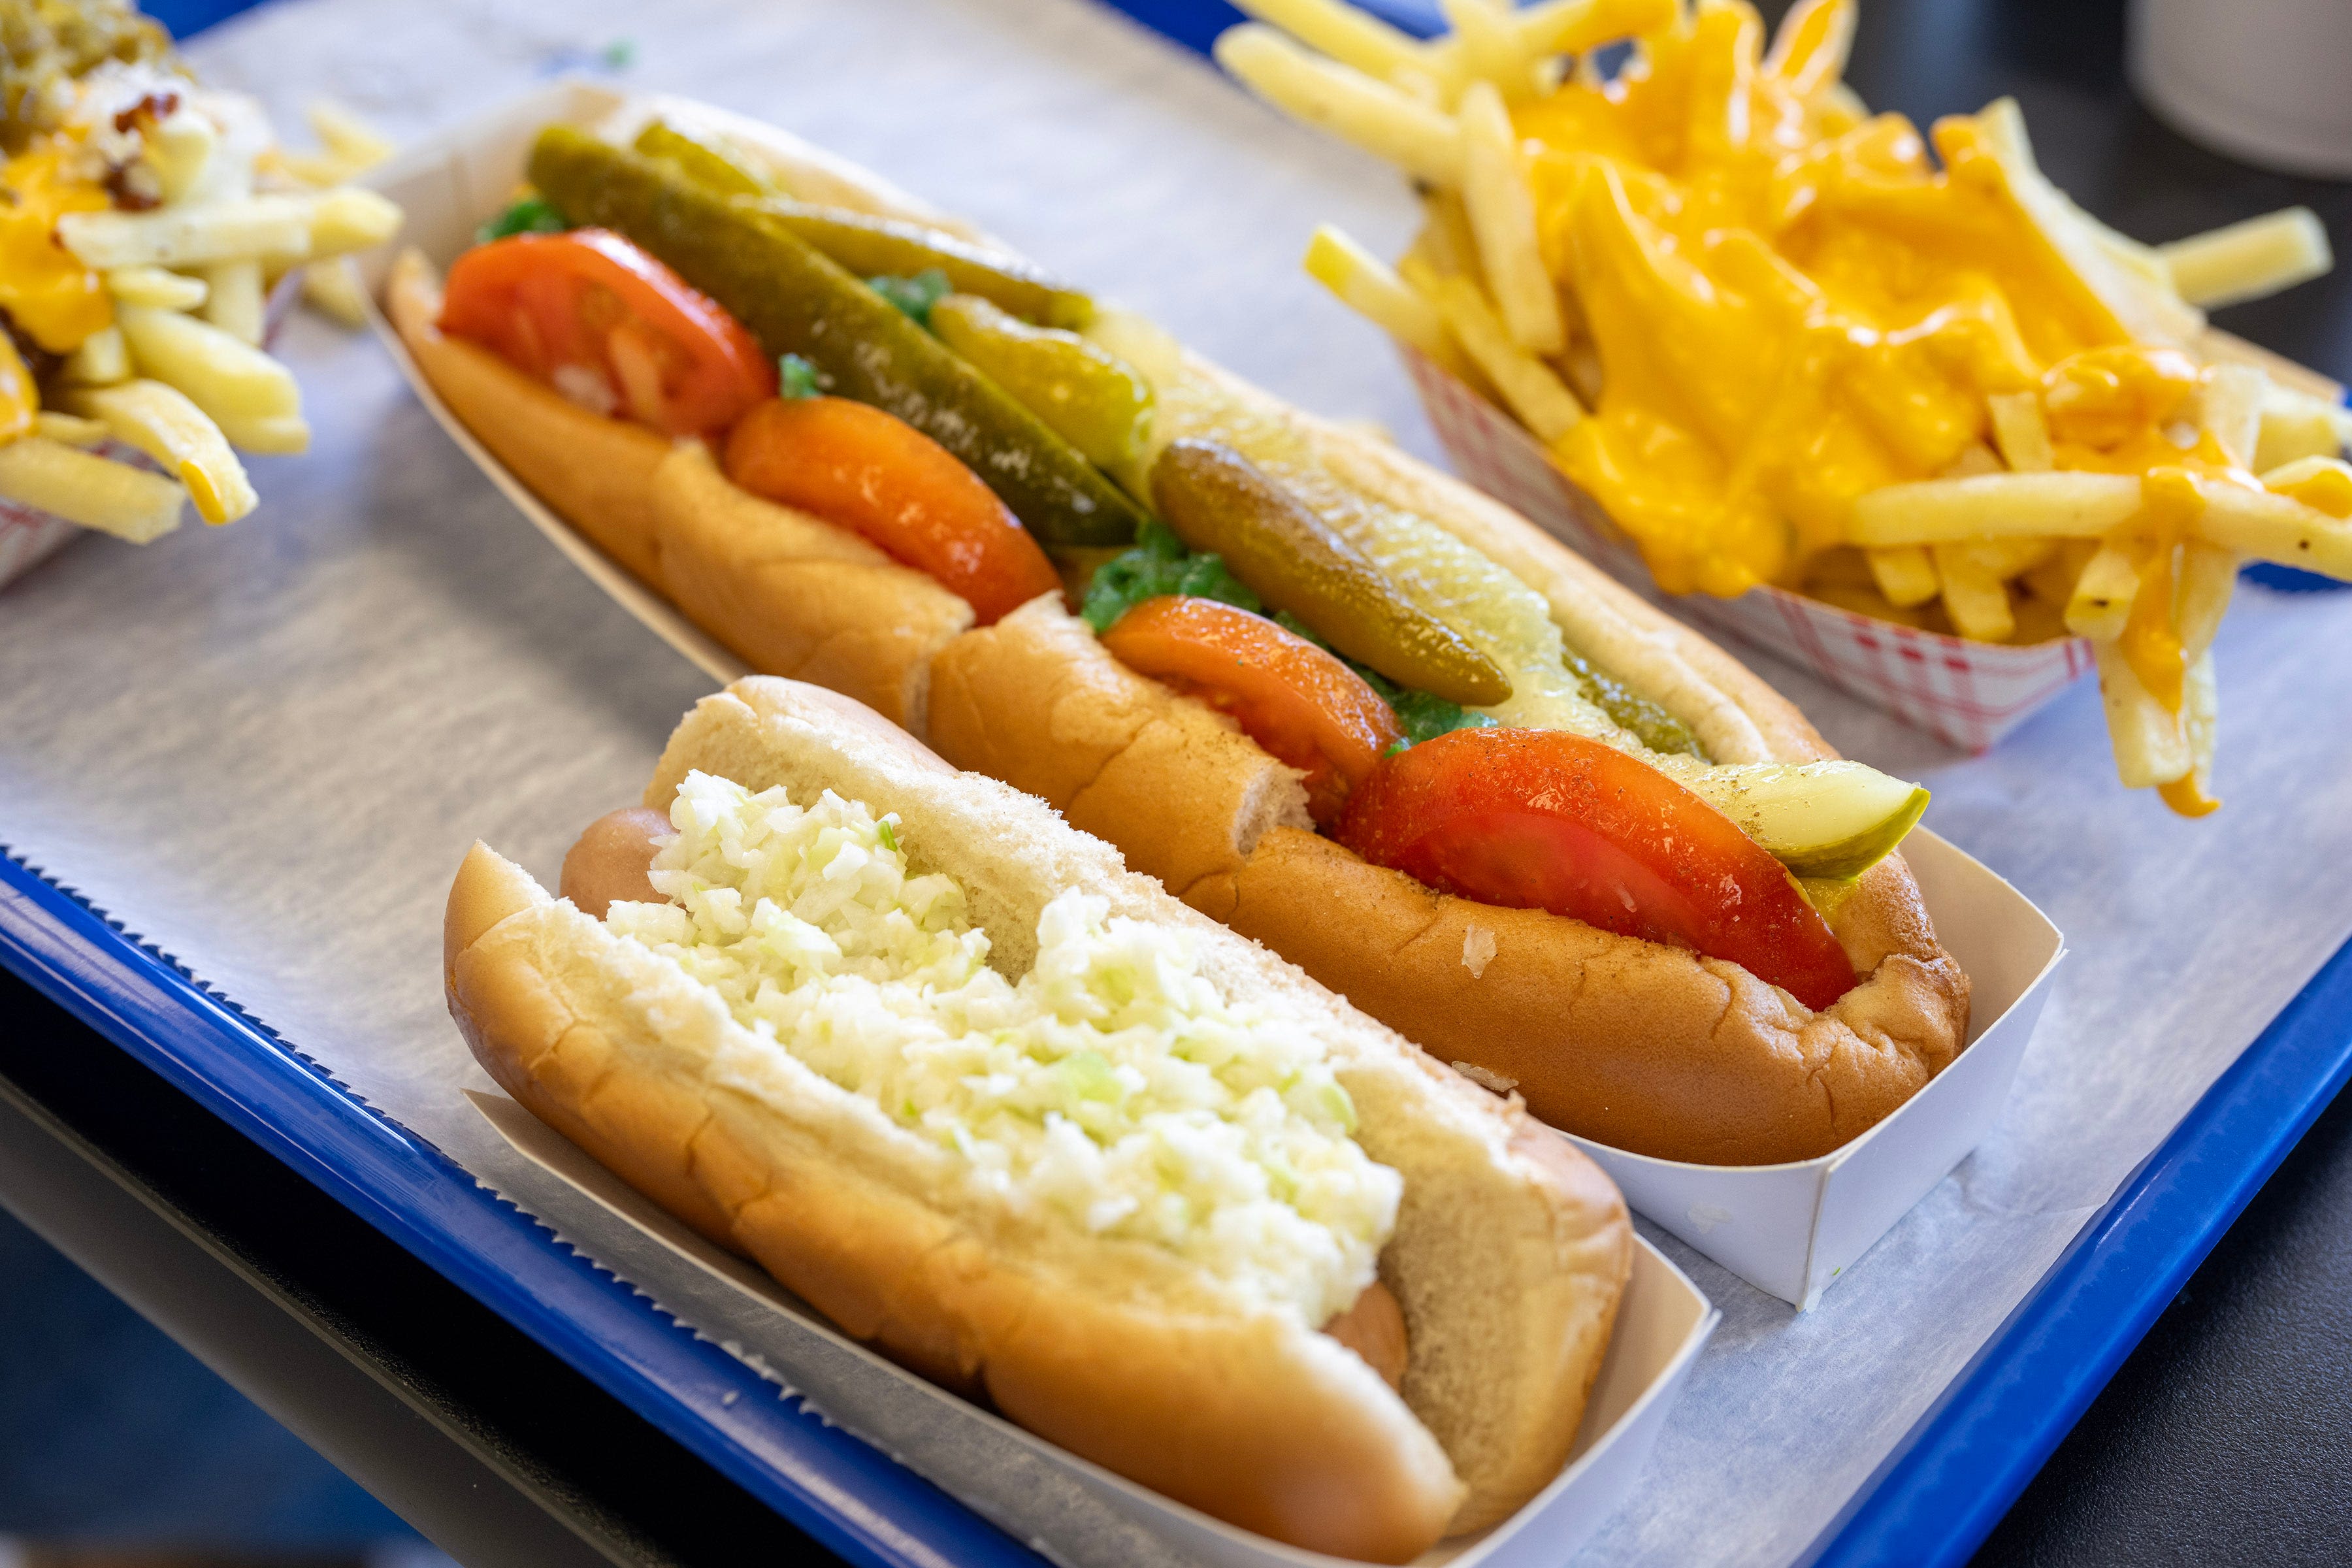 Footlong hot dogs: Coney Island Drive-Inn expands to Eustis